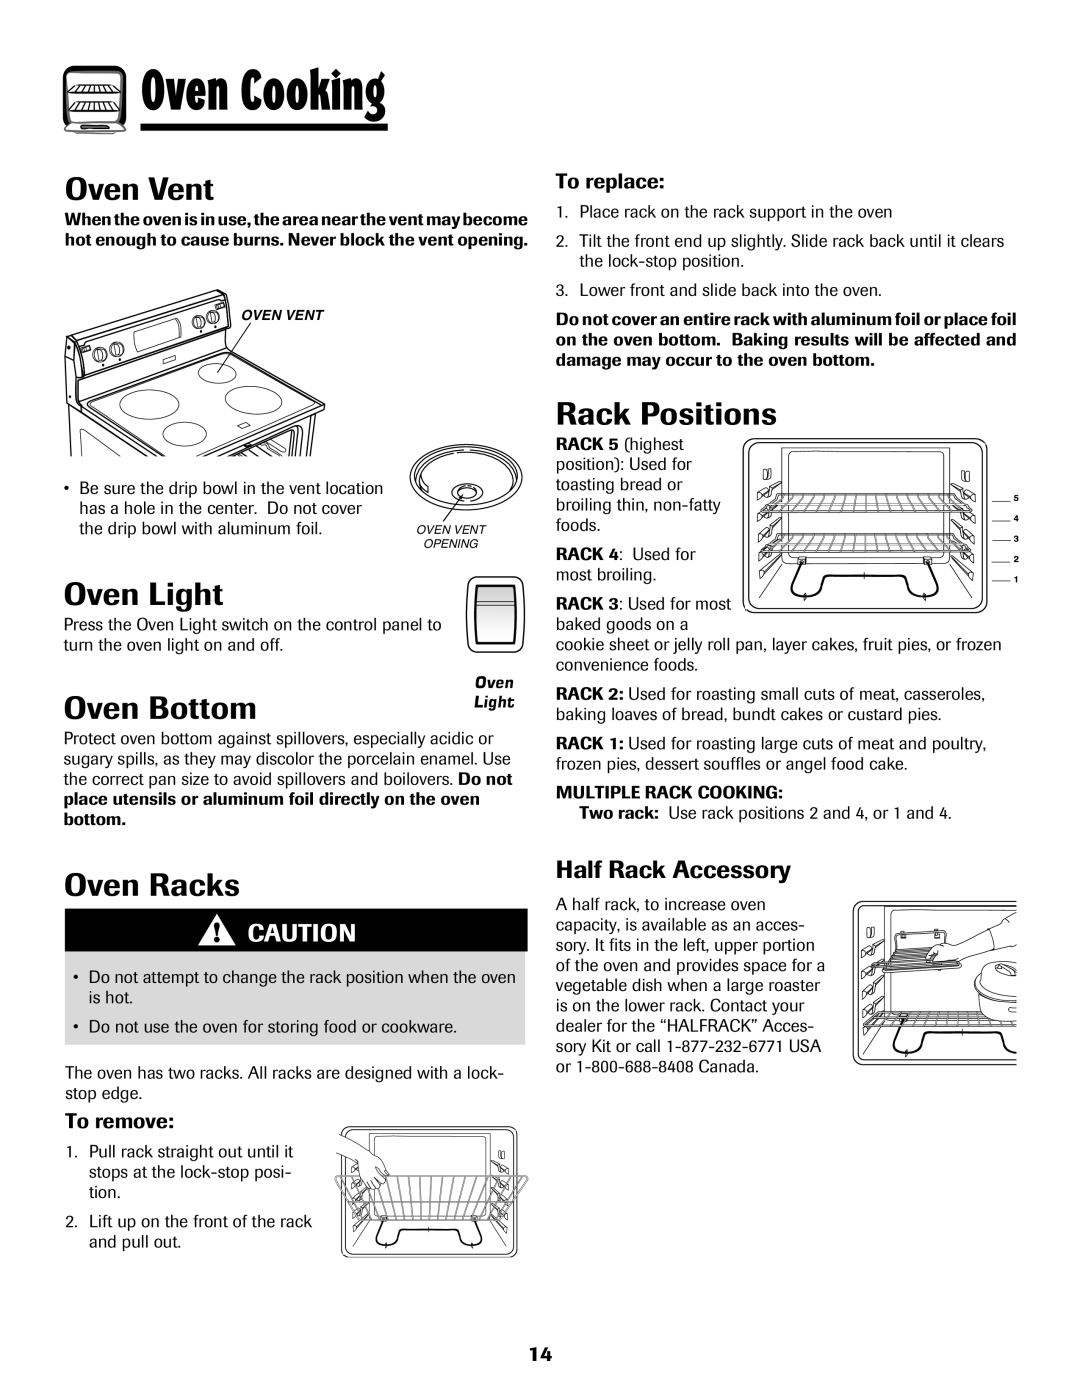 Amana Coil Oven Vent, Oven Light, Oven Bottom, Rack Positions, Oven Racks, Half Rack Accessory, To replace, To remove 